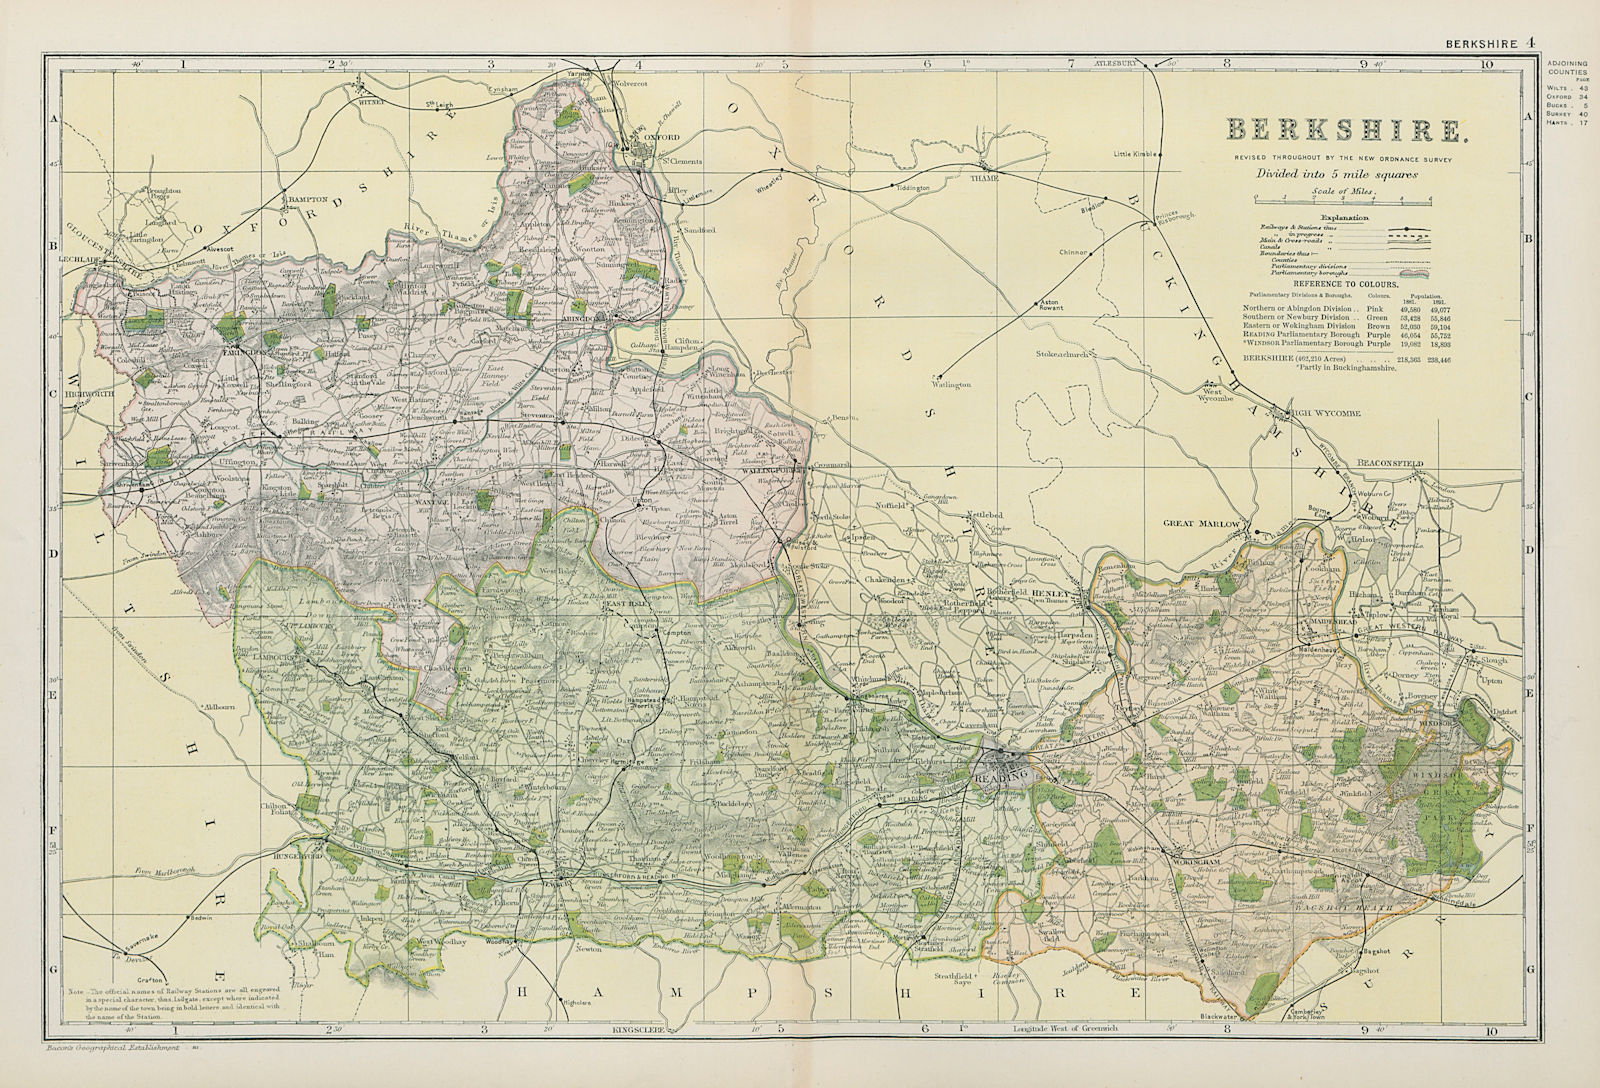 Associate Product BERKSHIRE. Showing Parliamentary divisions, boroughs & parks. BACON 1900 map